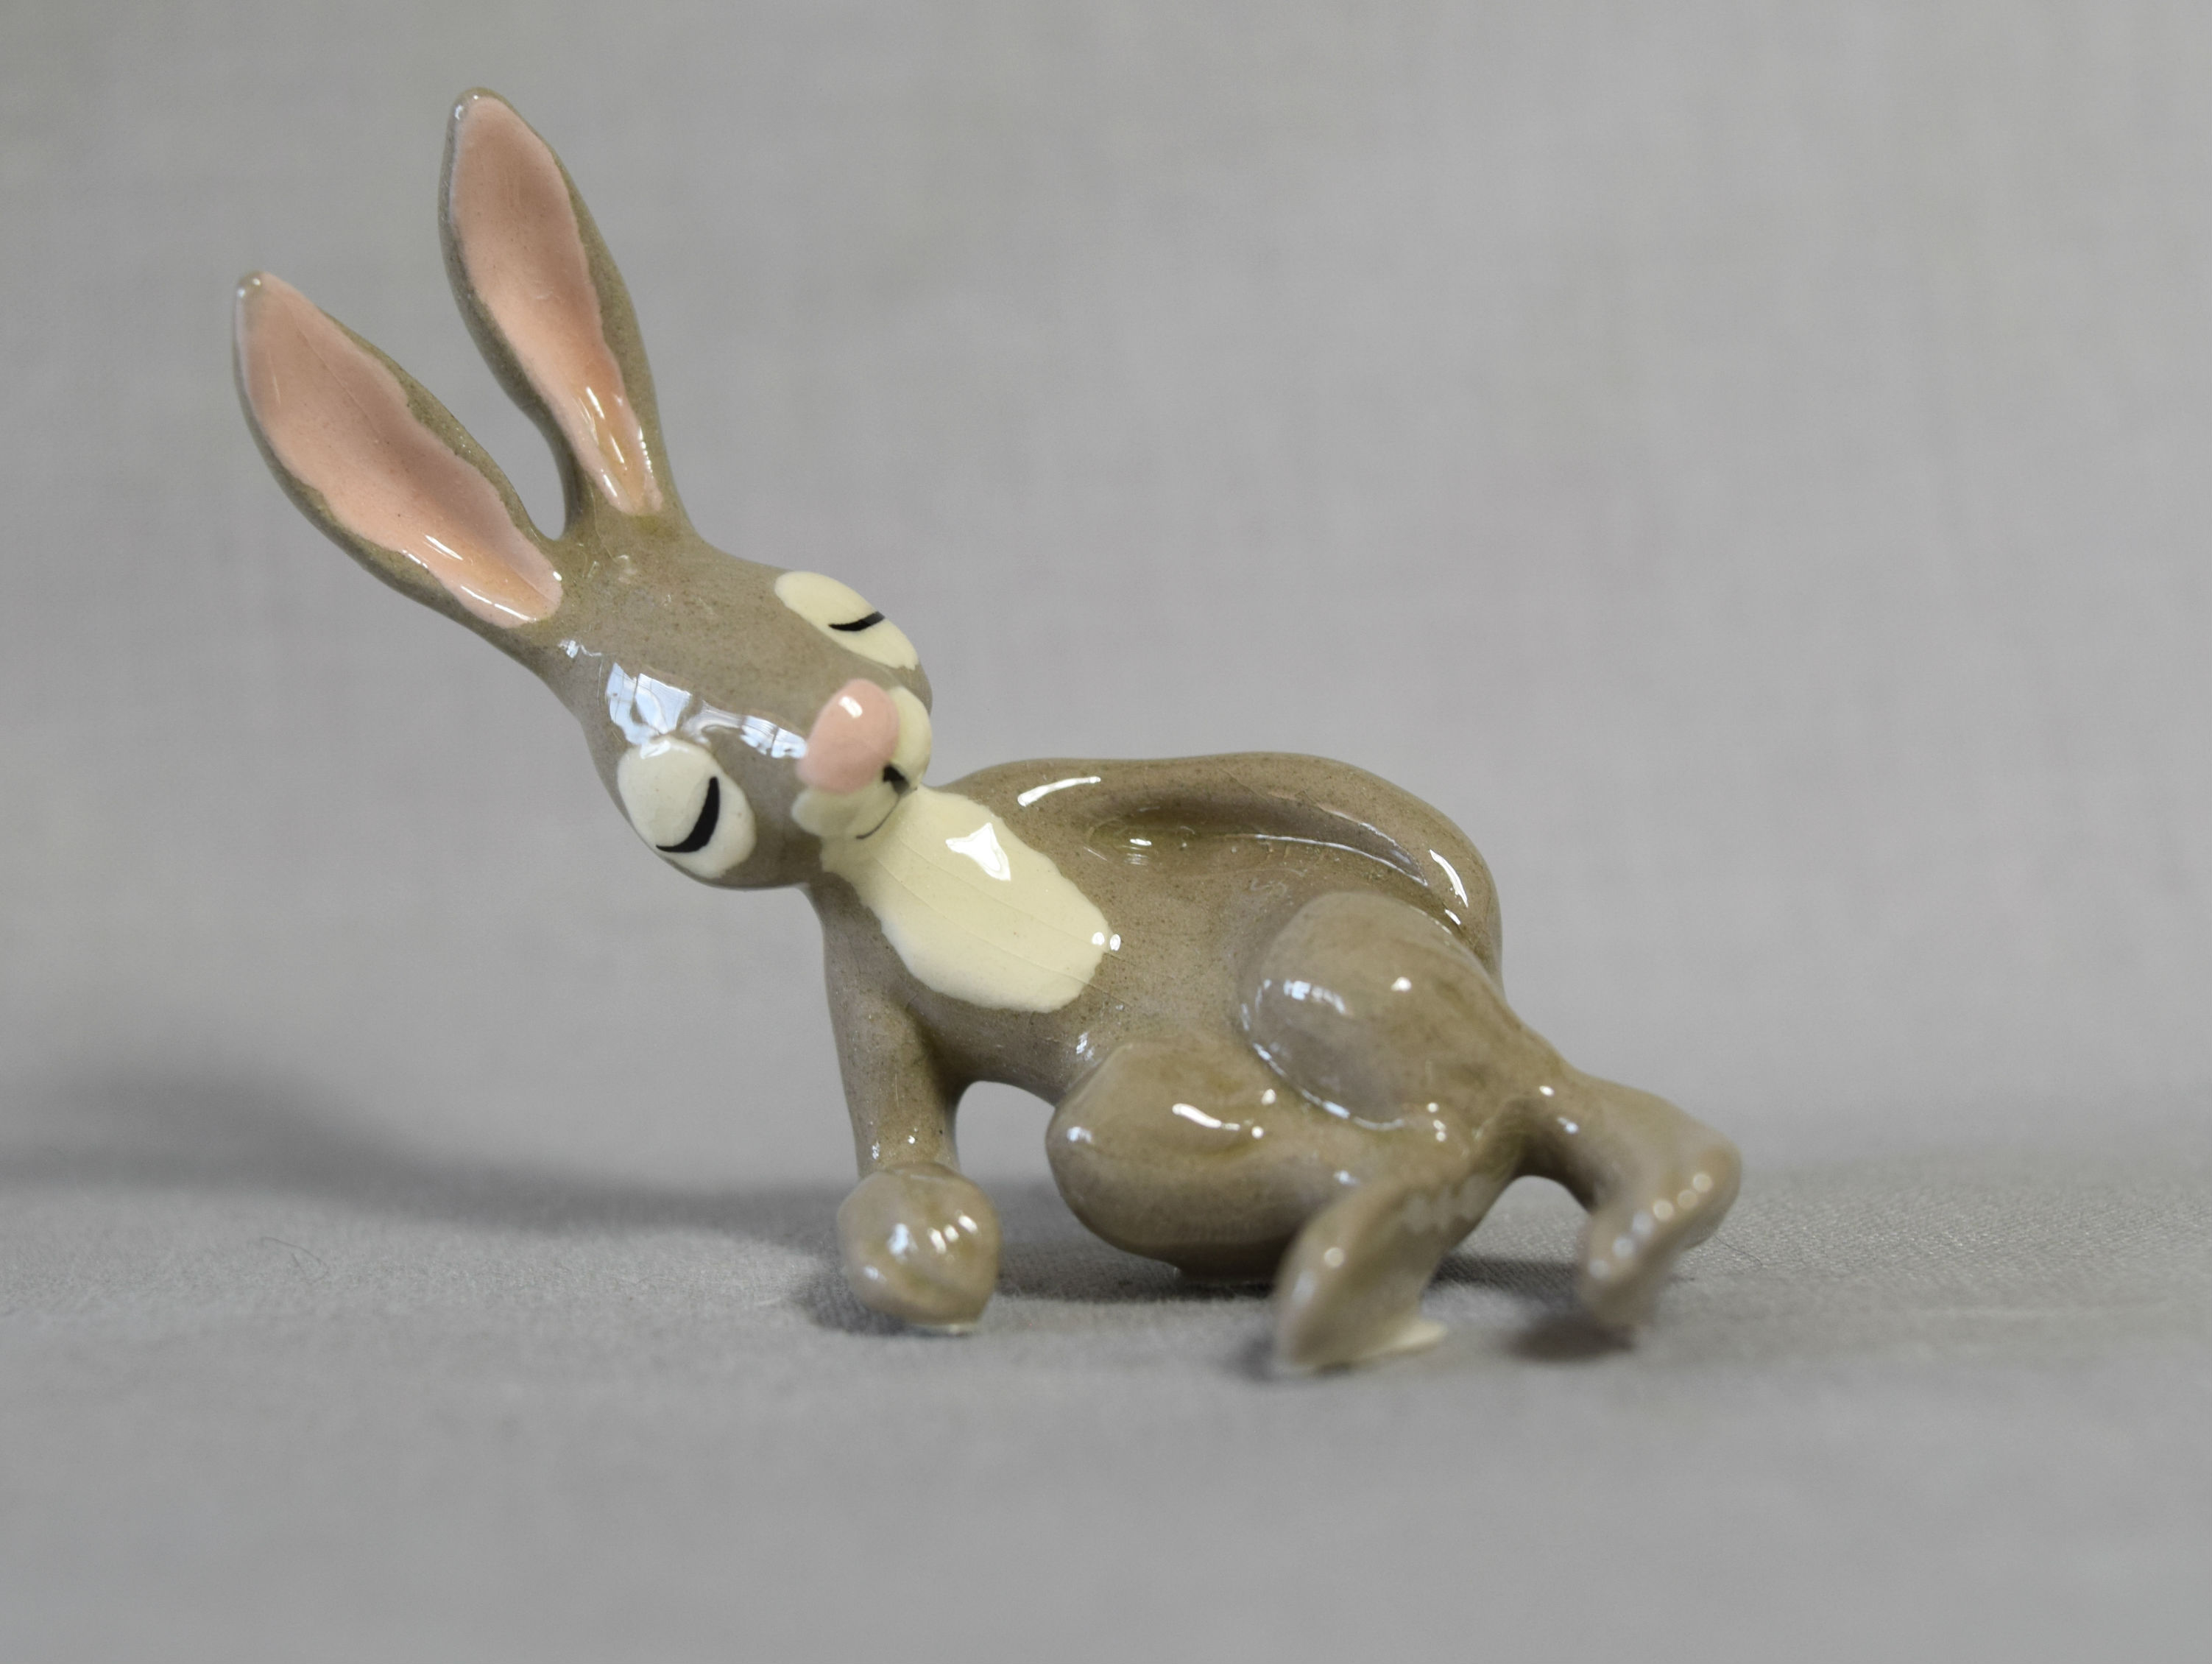 Hare, right arm extended-image